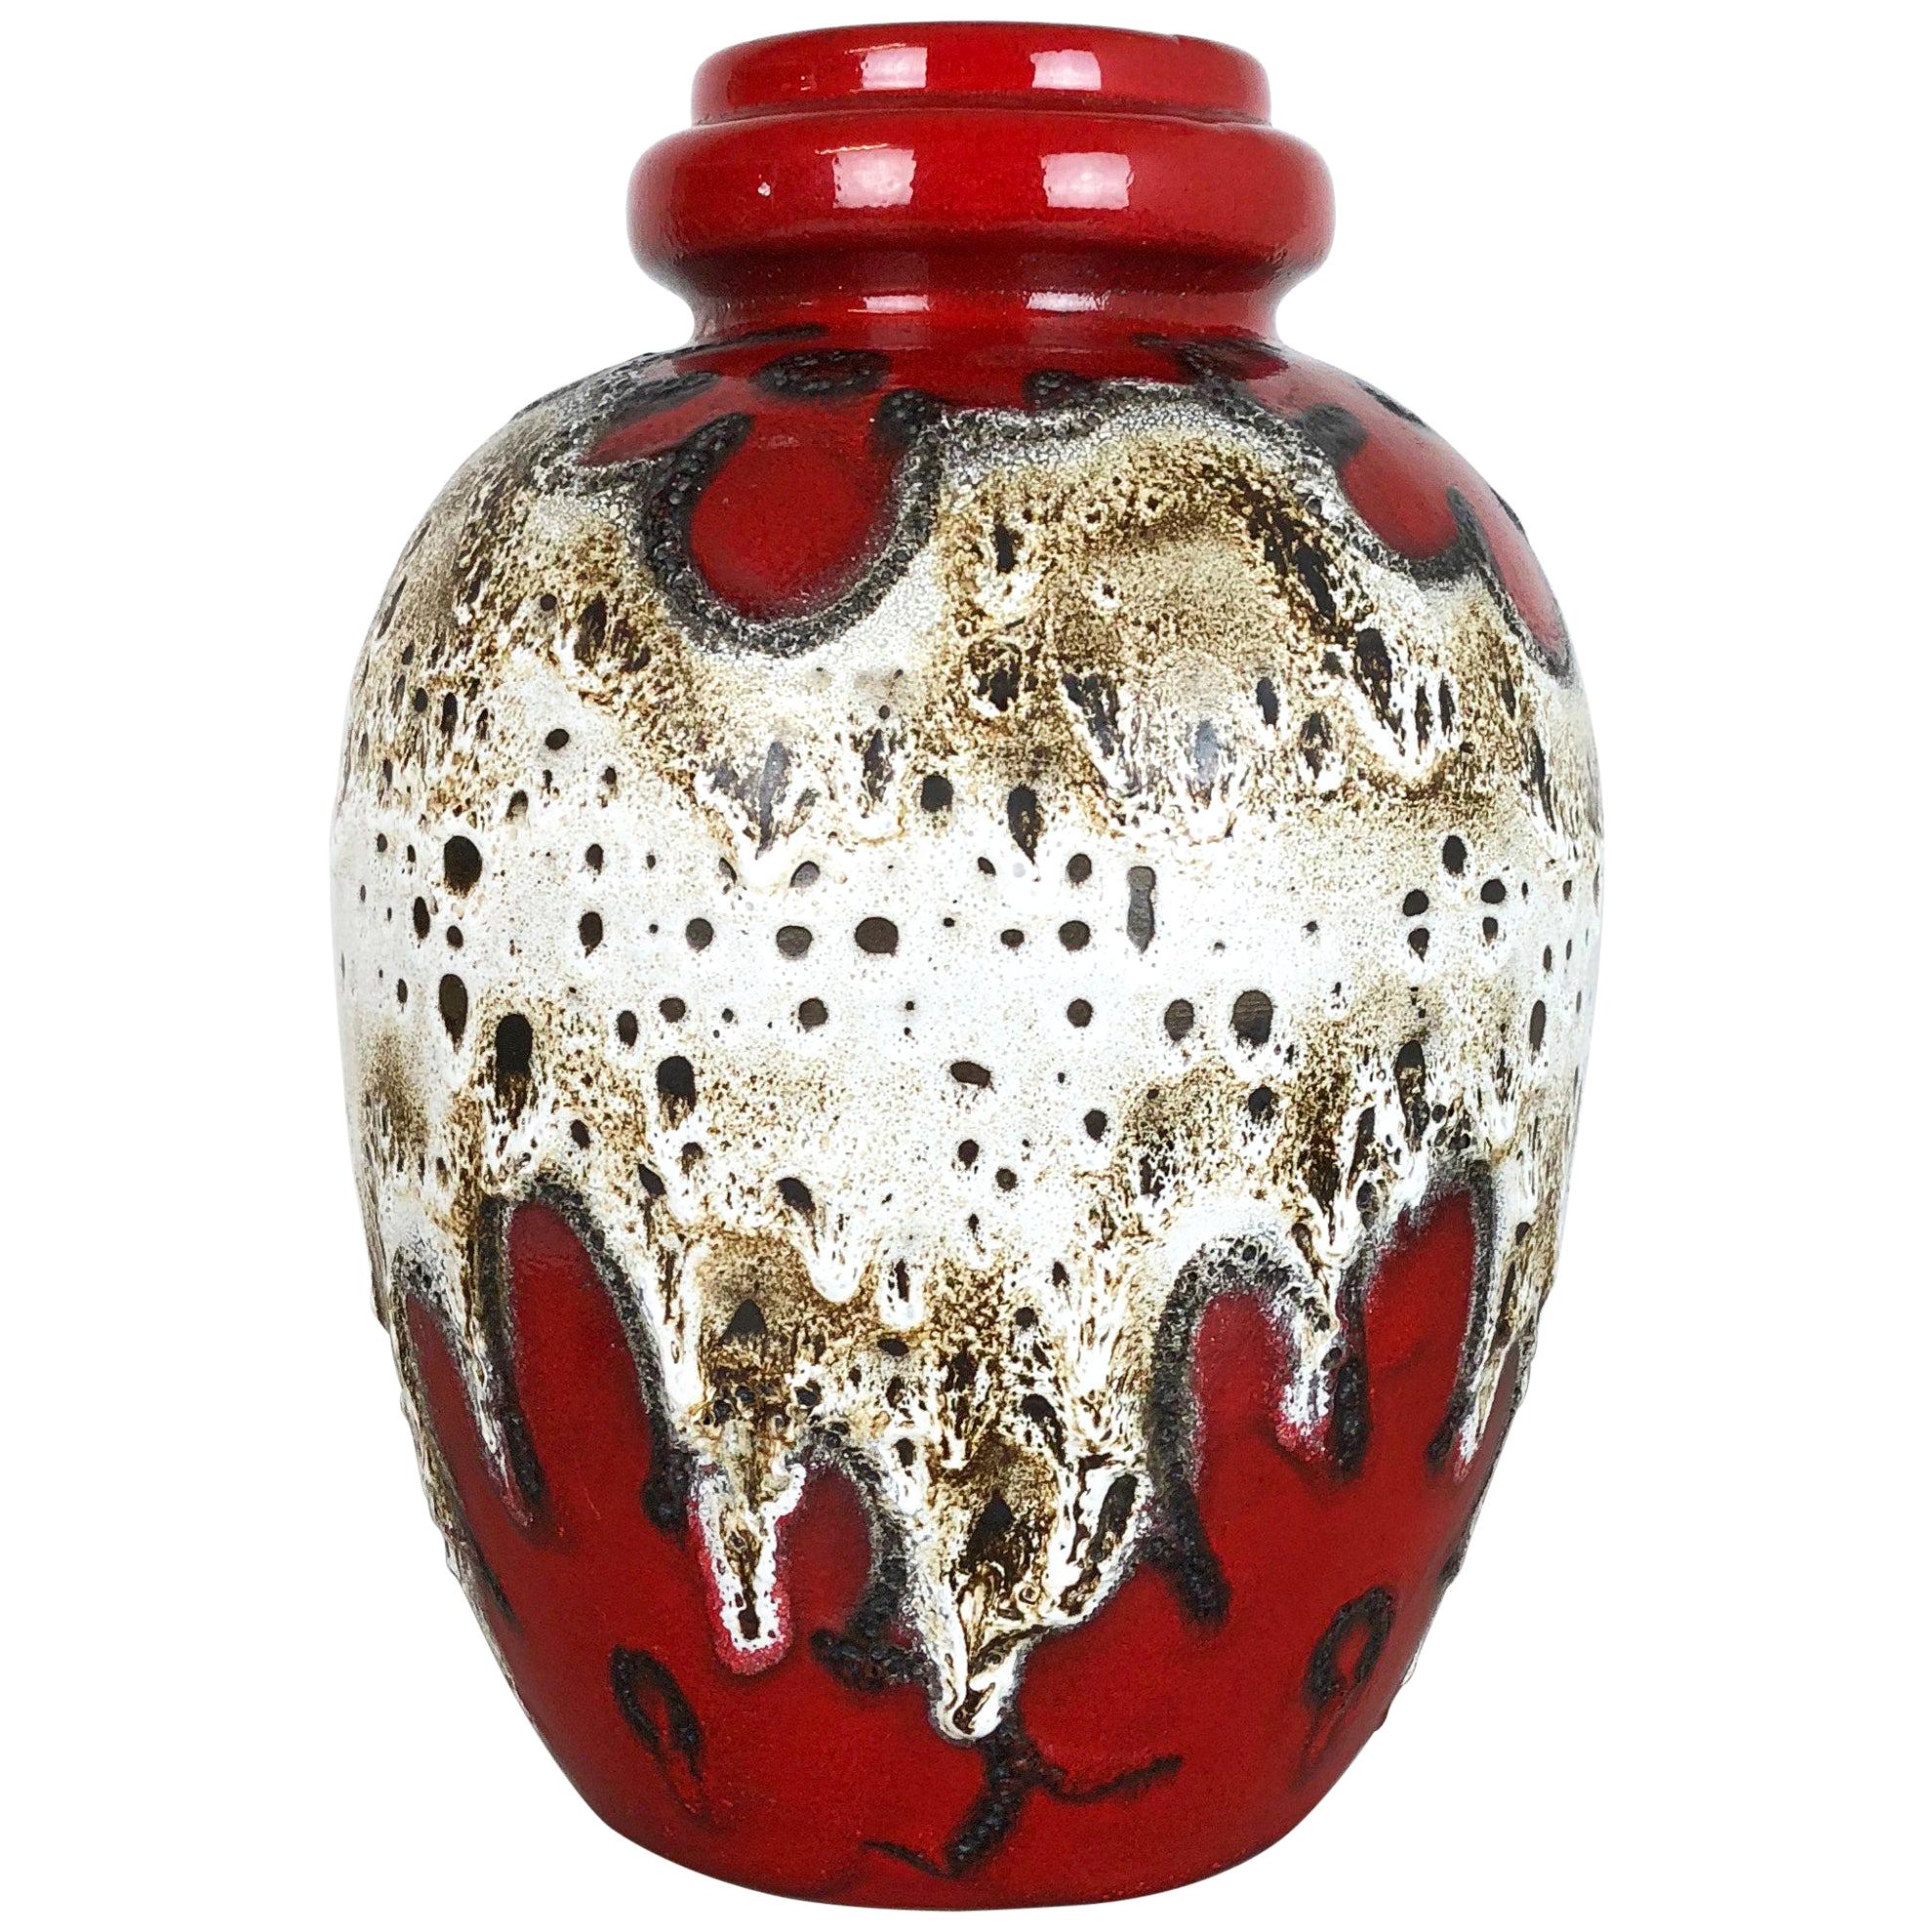 Large Pottery Fat Lava Multicolor 280-42 Vase Made by Scheurich, 1970s